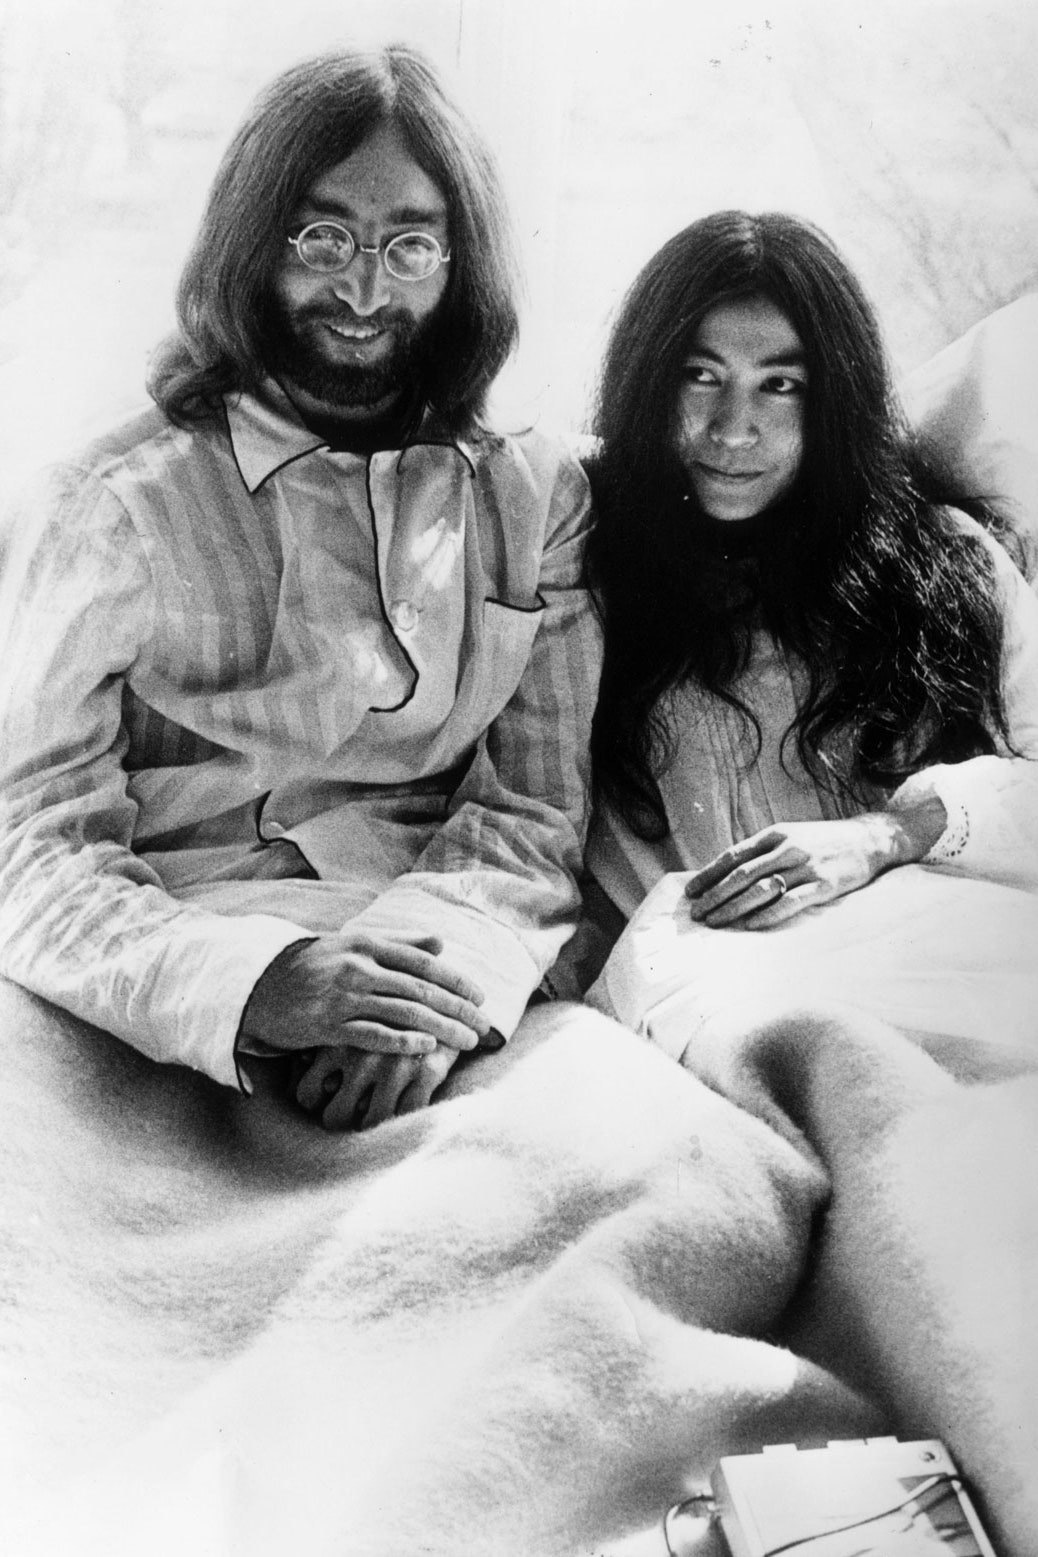 John Lennon and Yoko Ono: The story behind the legendary photo of the couple after their wedding